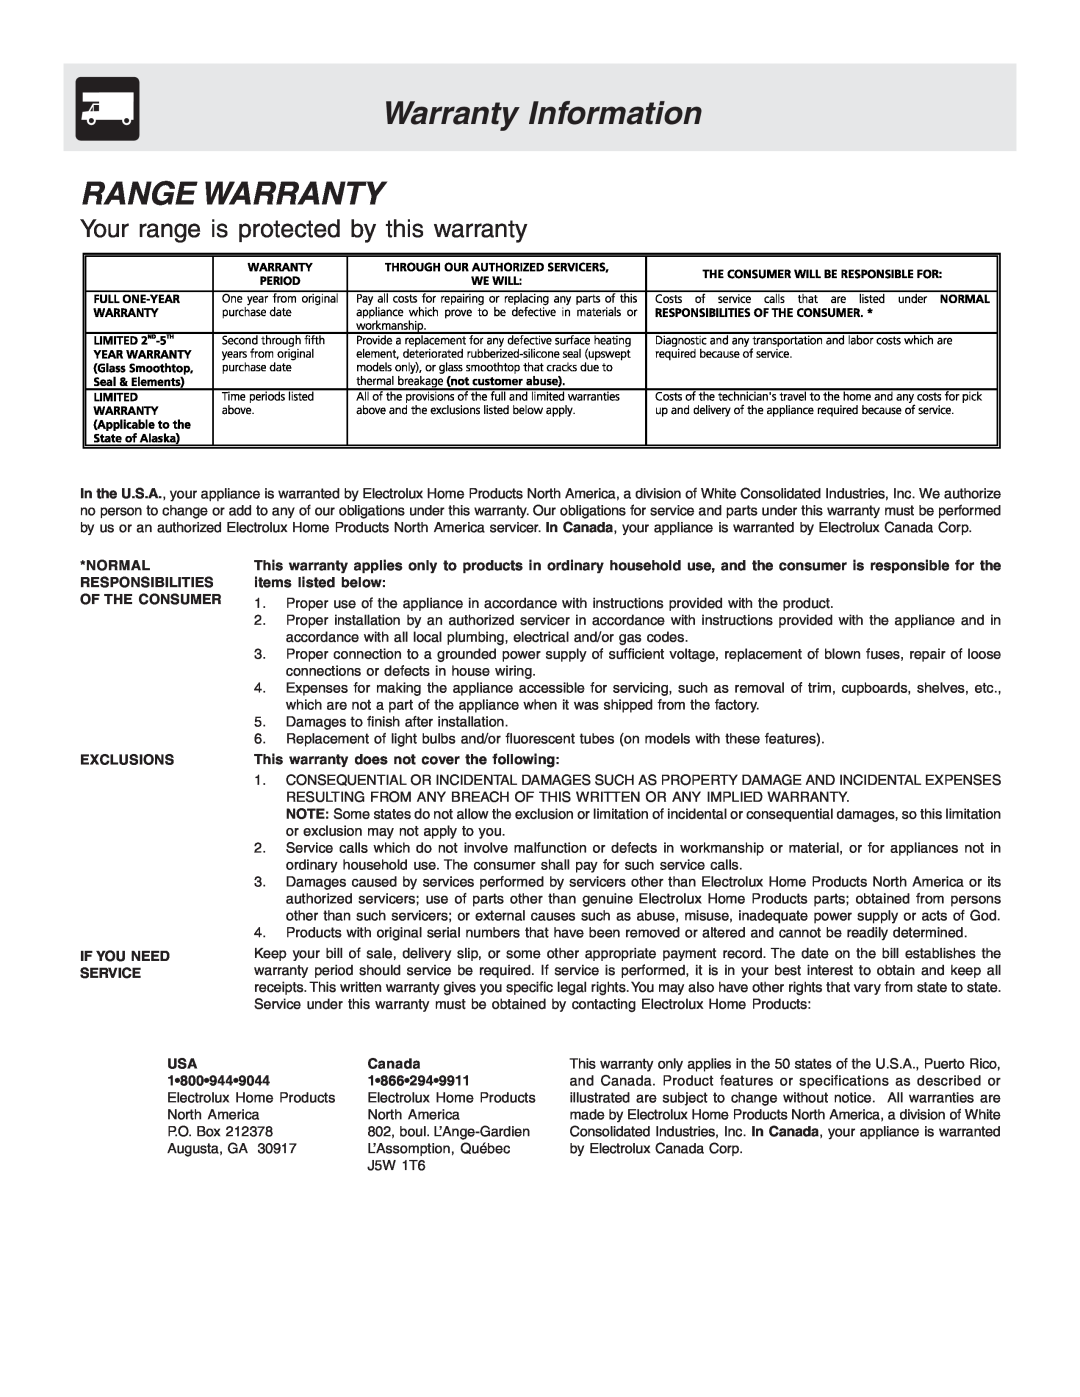 Electrolux Slide-in Warranty Information, Range Warranty, Your range is protected by this warranty, Canada, 1 866 294 